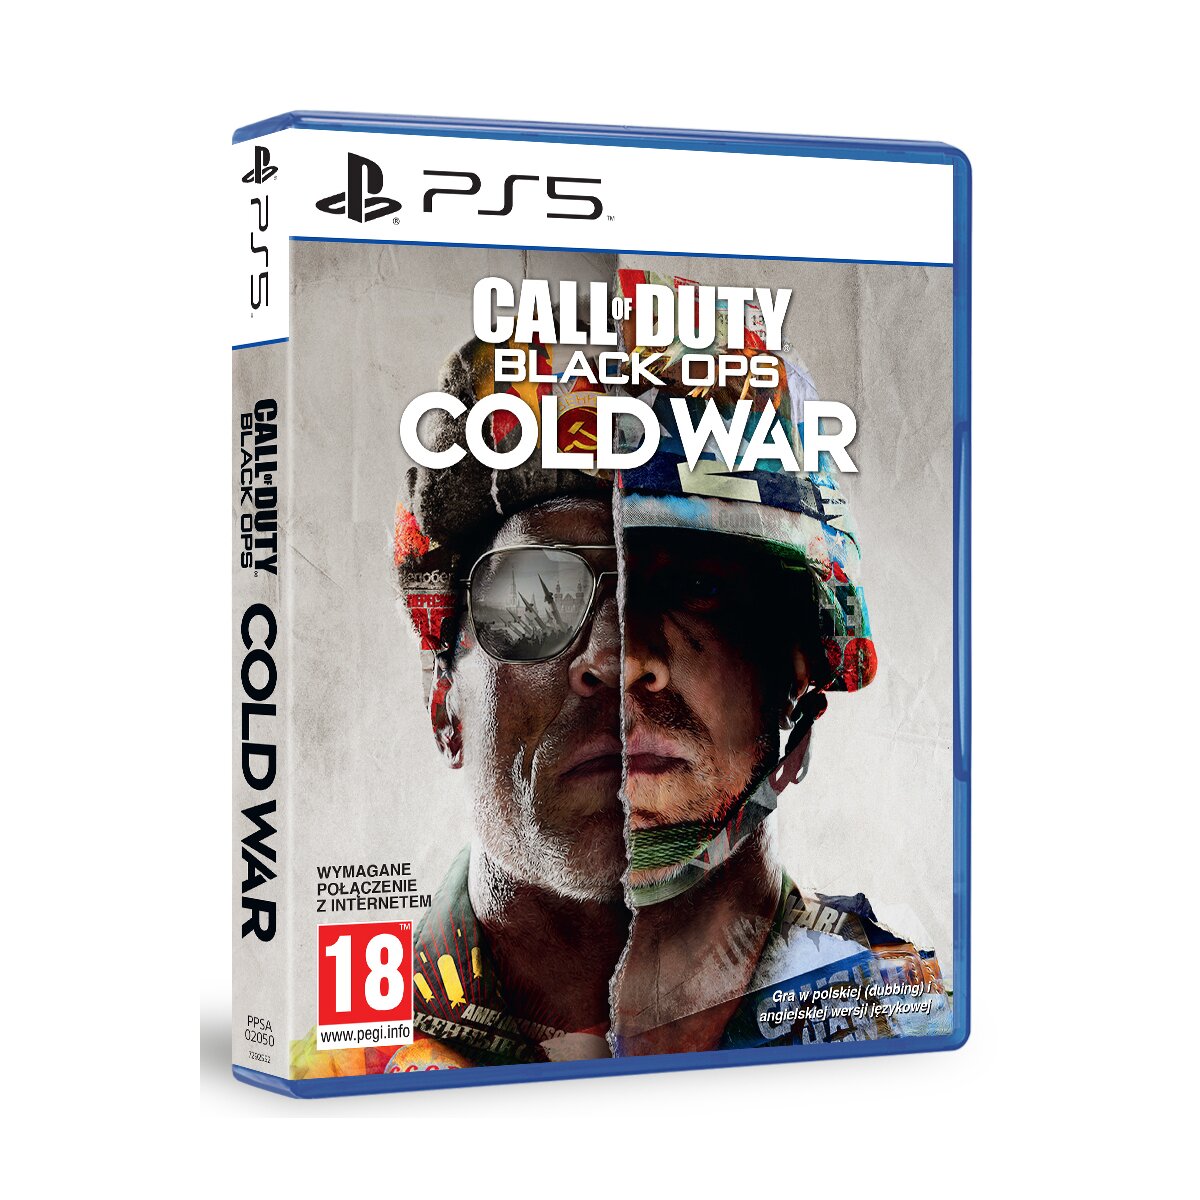 ps5 call of duty cold war campaign not installed